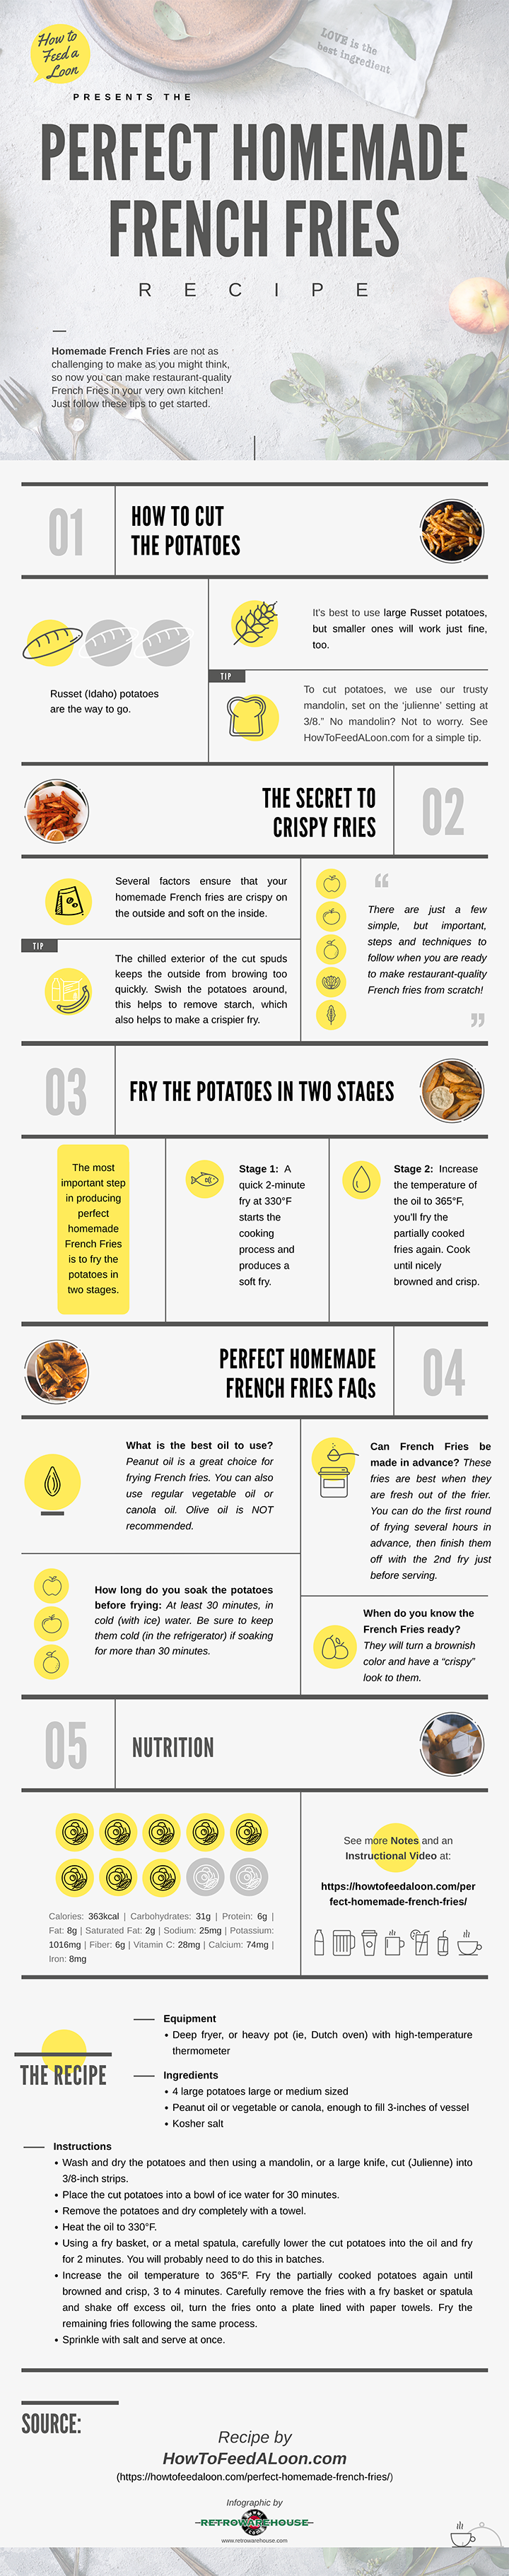 Make The Perfect Homemade French Fries Infographic